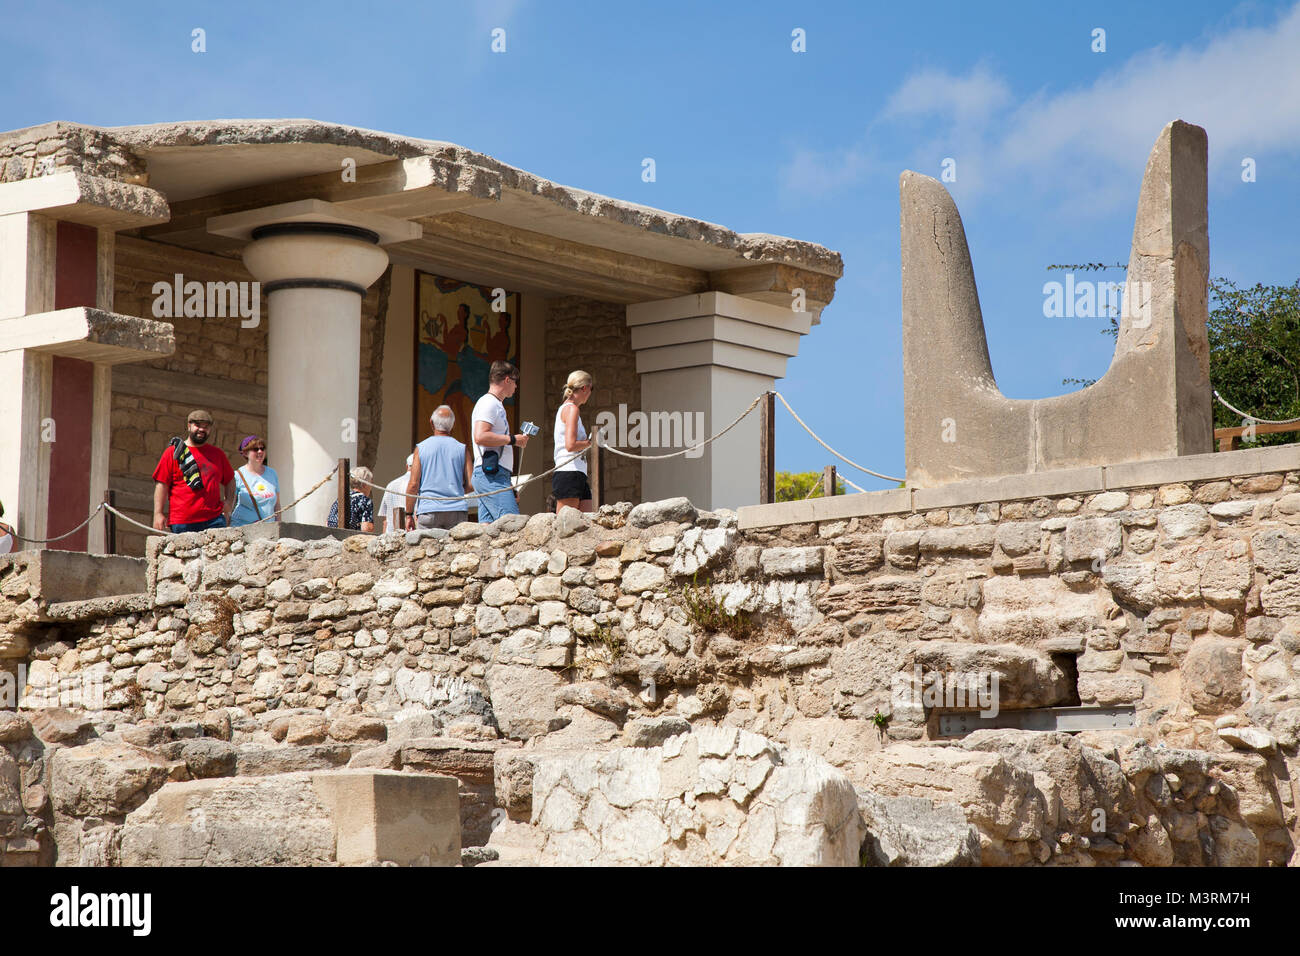 South facade and Propylaeum with Horns of consecration symbol of Minoan sacred bull, Knossos palace archaeological site, Crete island, Greece, Europe Stock Photo